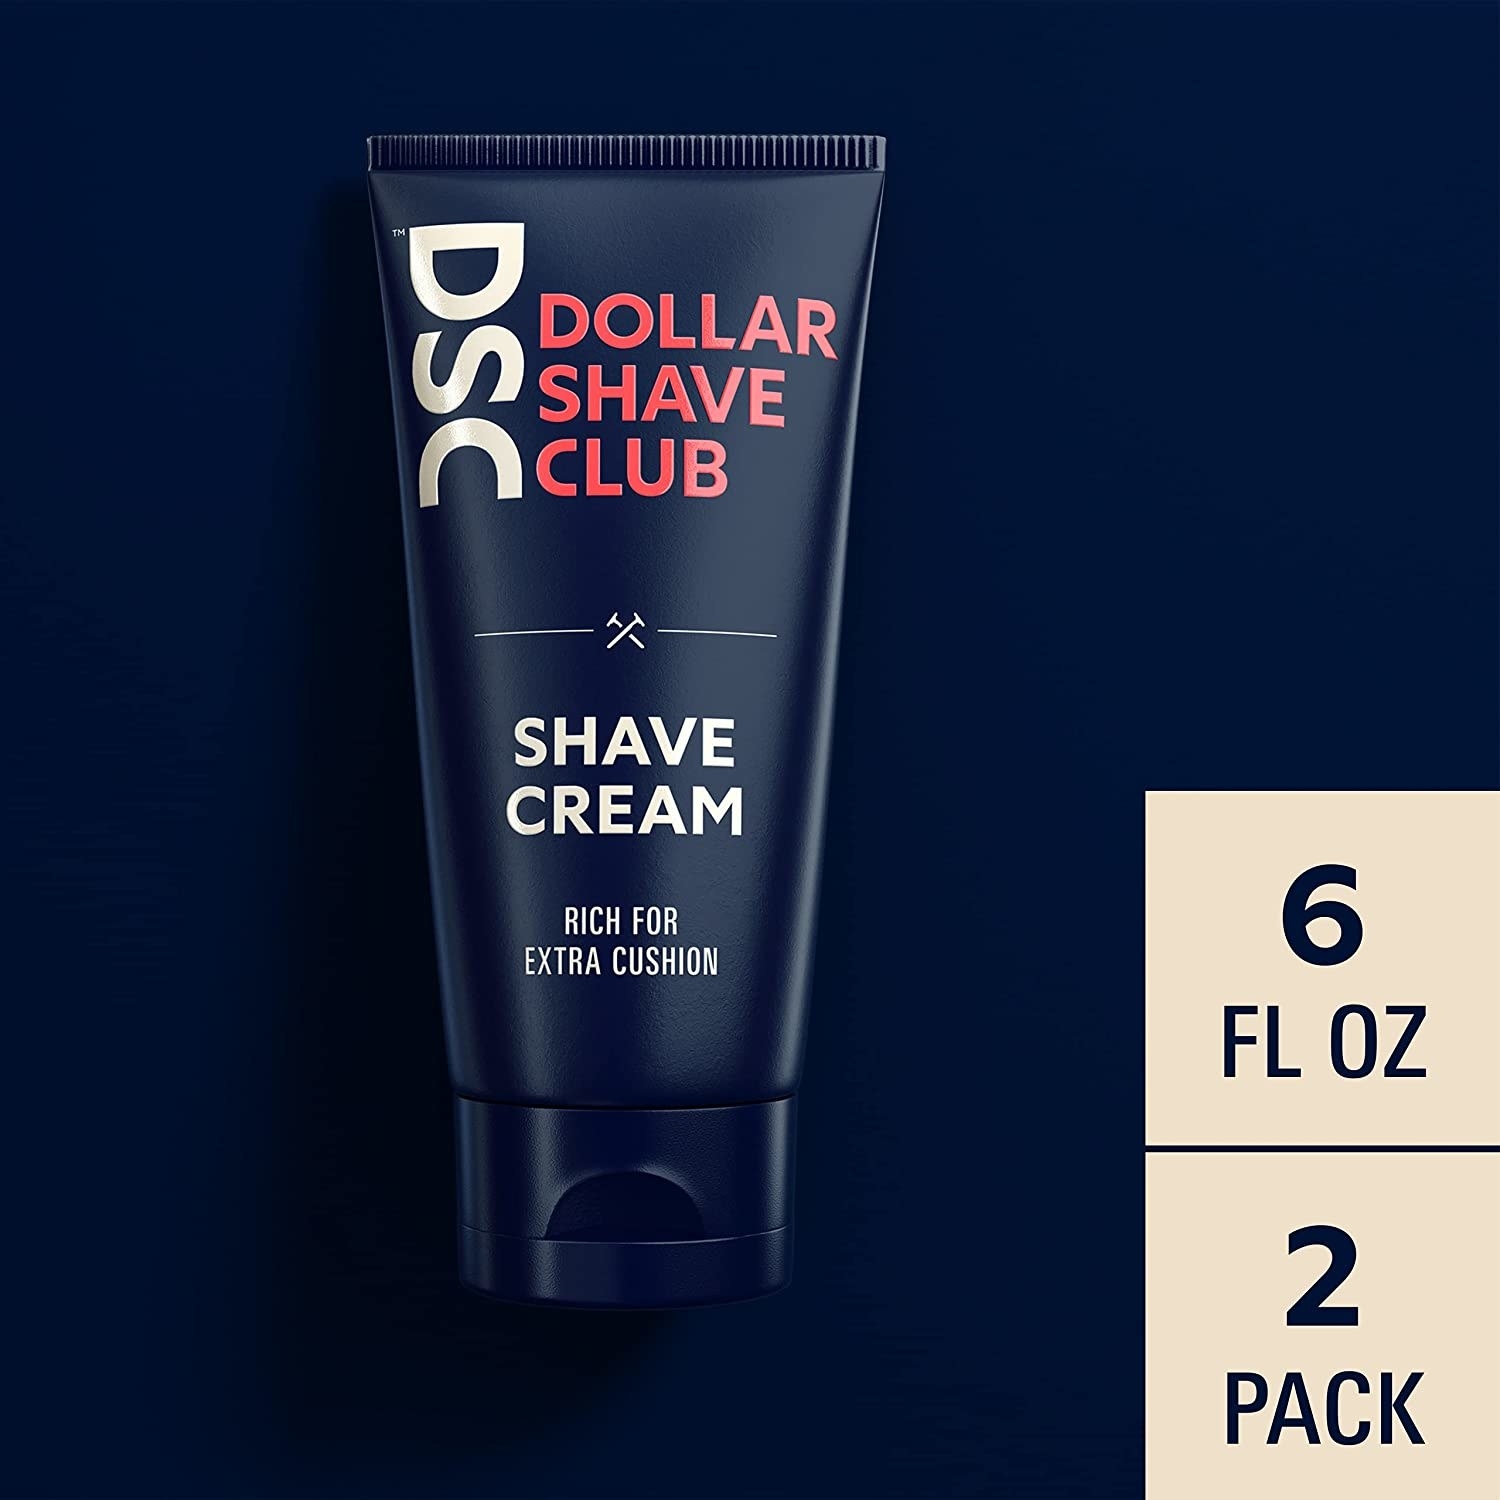 The shave cream tube that&#x27;s &quot;rich for extra cushion&quot; with package dimensions listed as 6 fl oz, 2 pack